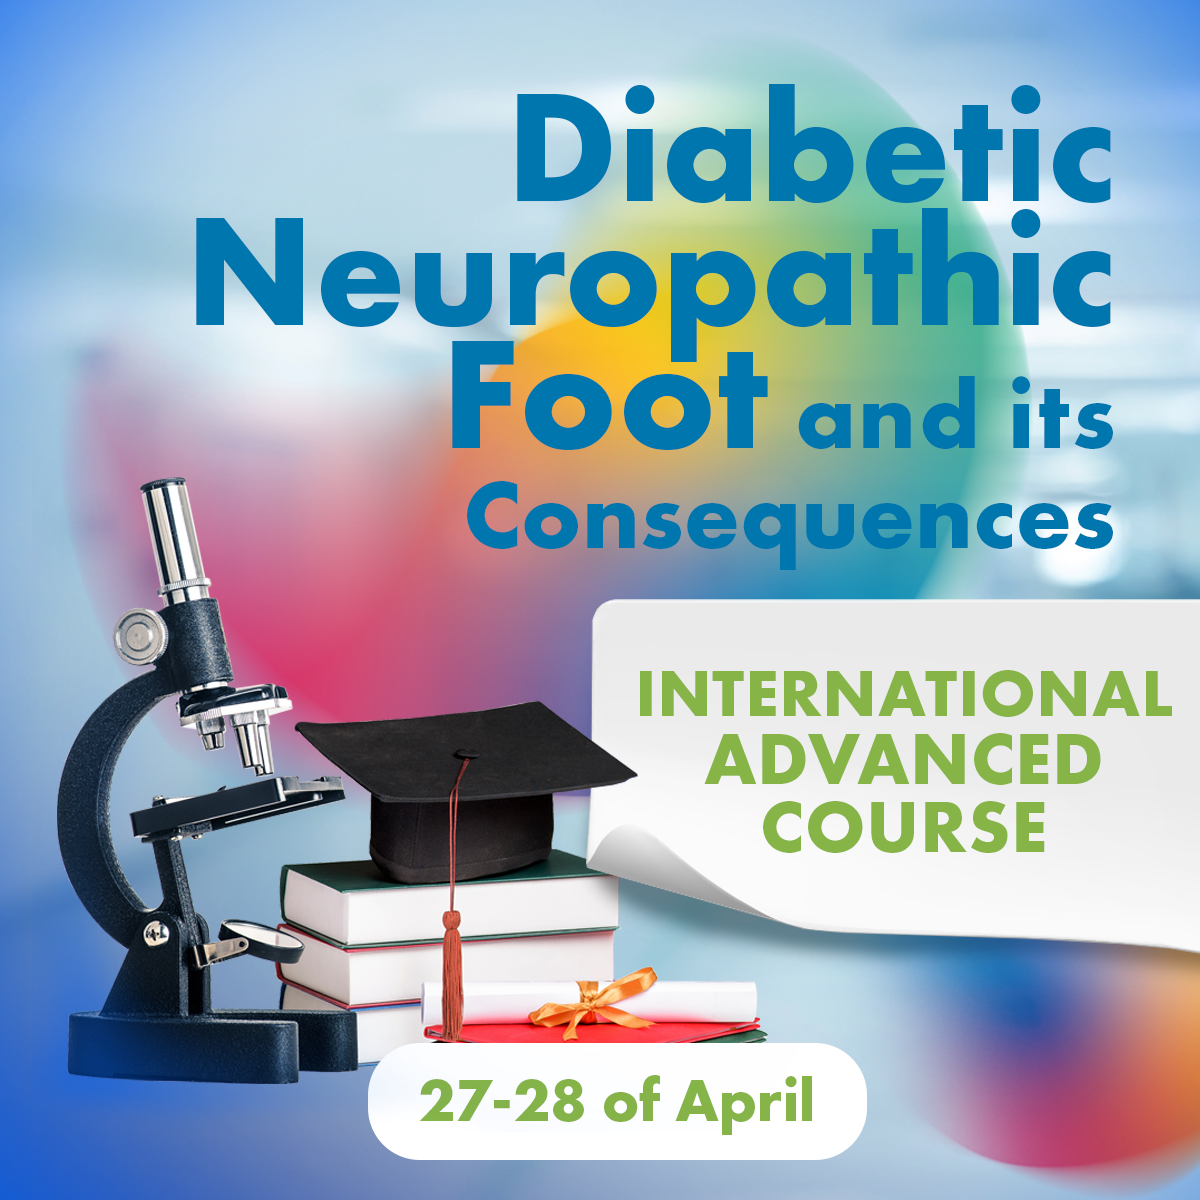 2nd International Advanced Course of Diabetic Neuropathic Foot and its Consequences